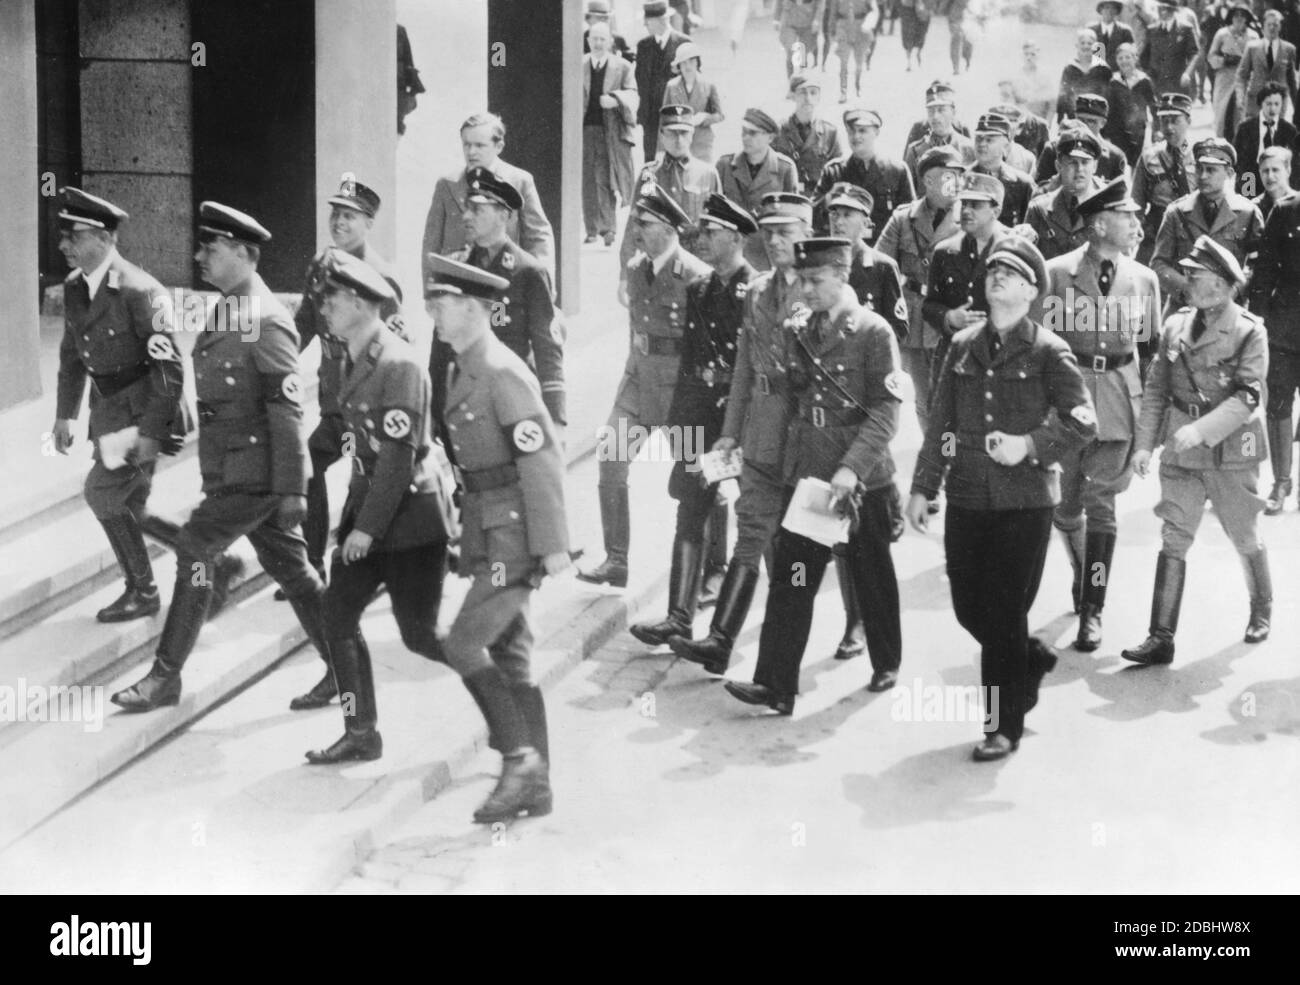 'The exhibition on the German Revolution ''Der Kampf der N.S.D.A.P.'' (''The Fight of the N.S.D.A.P.'') is to be opened by Reichsleiter Alfred Rosenberg in the Duesseldorf exhibition halls. Rosenberg (2nd from left) and other party officials on the way to the opening.' Stock Photo